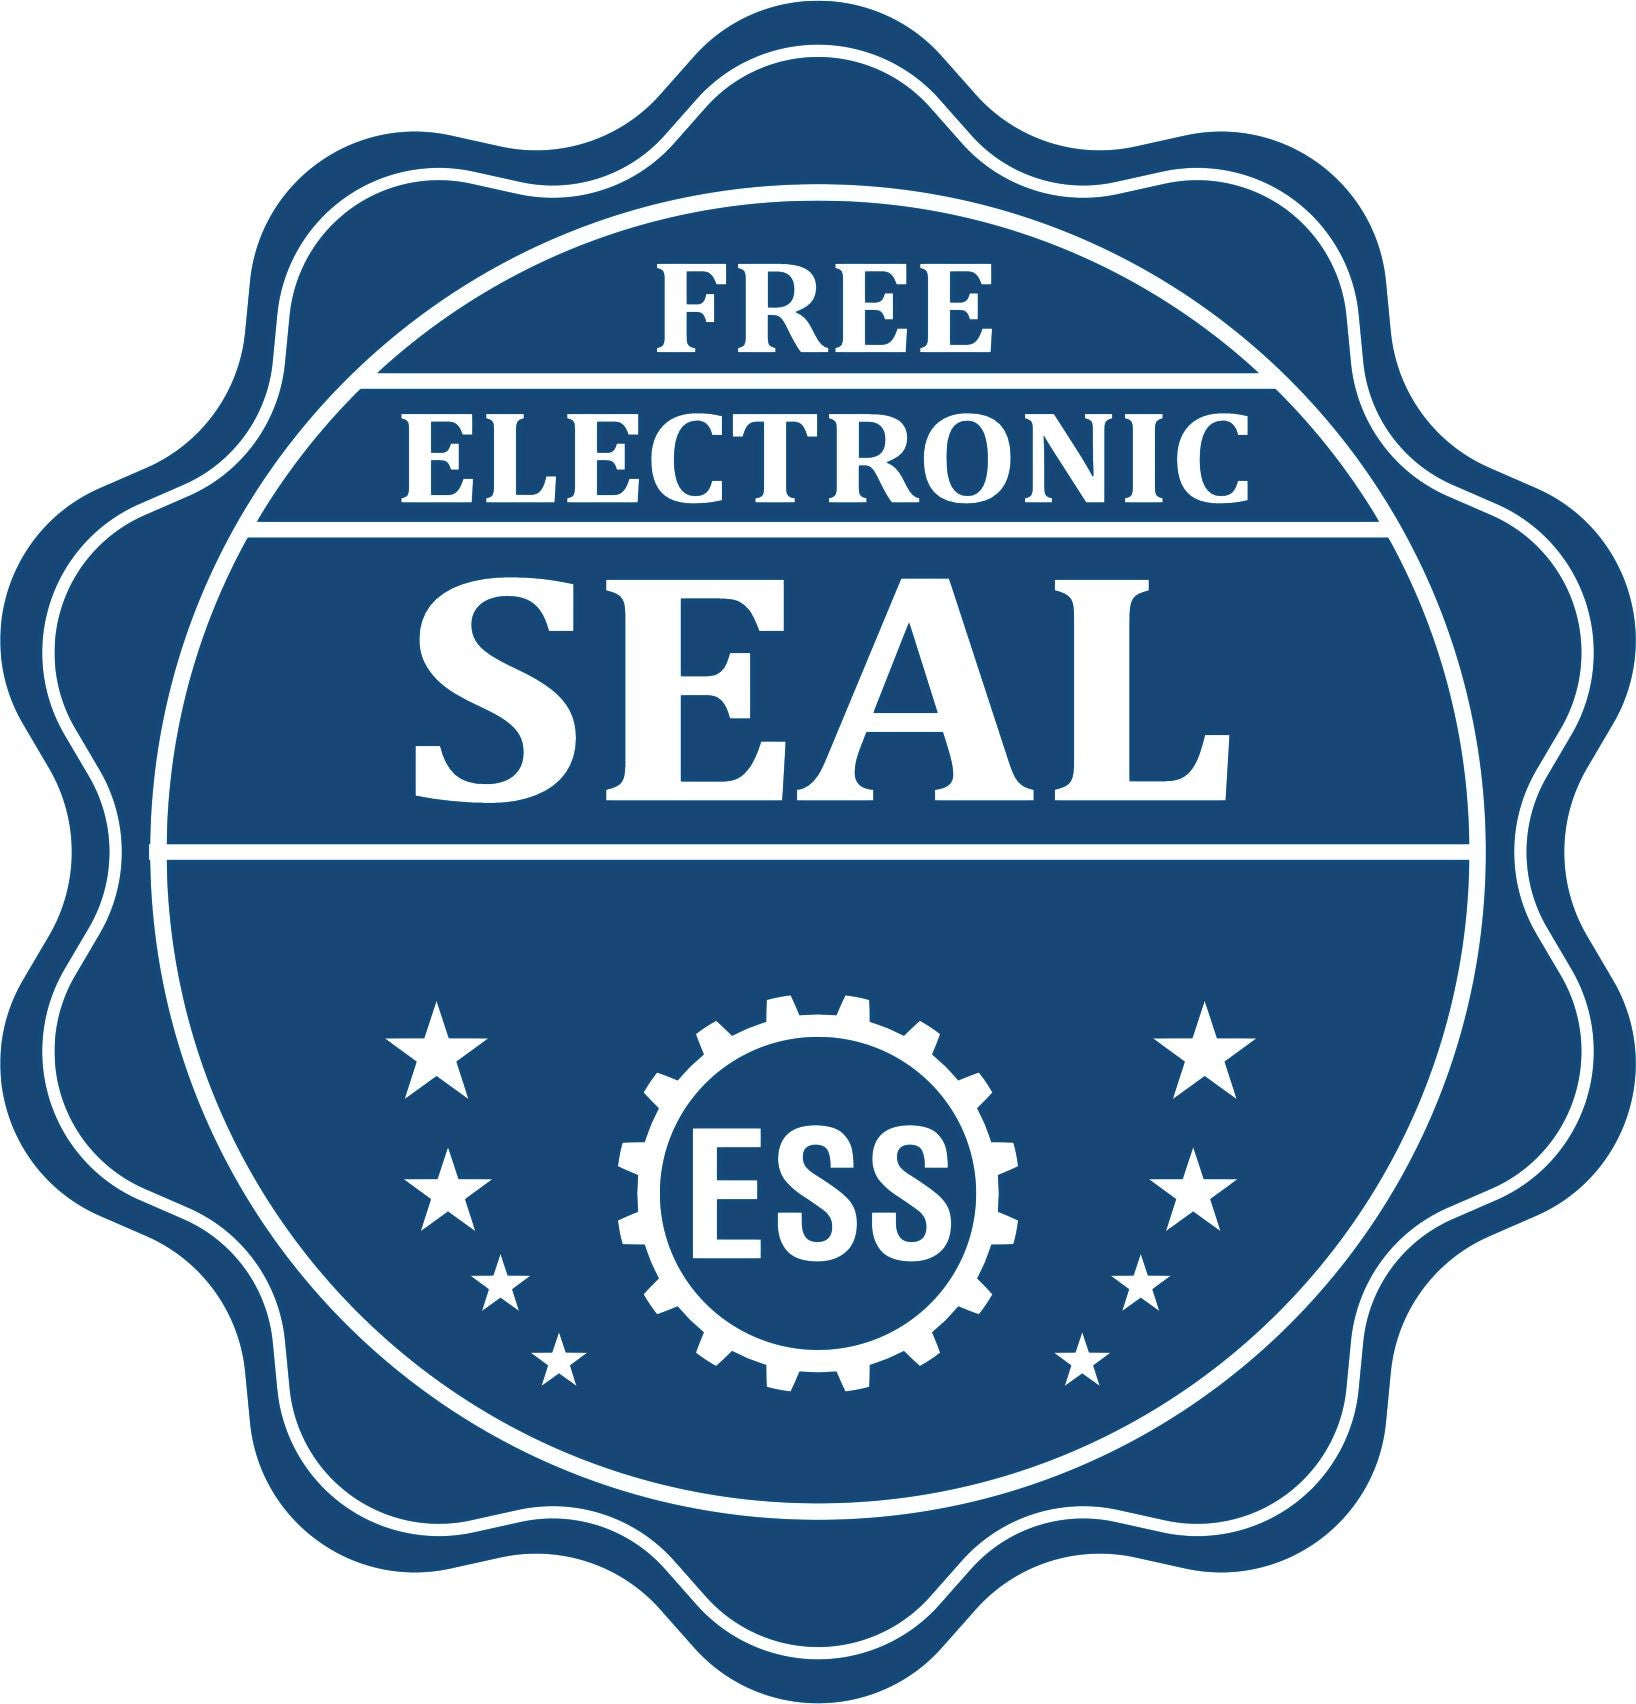 A badge showing a free electronic seal for the State of Ohio Soft Land Surveyor Embossing Seal with stars and the ESS gear on the emblem.